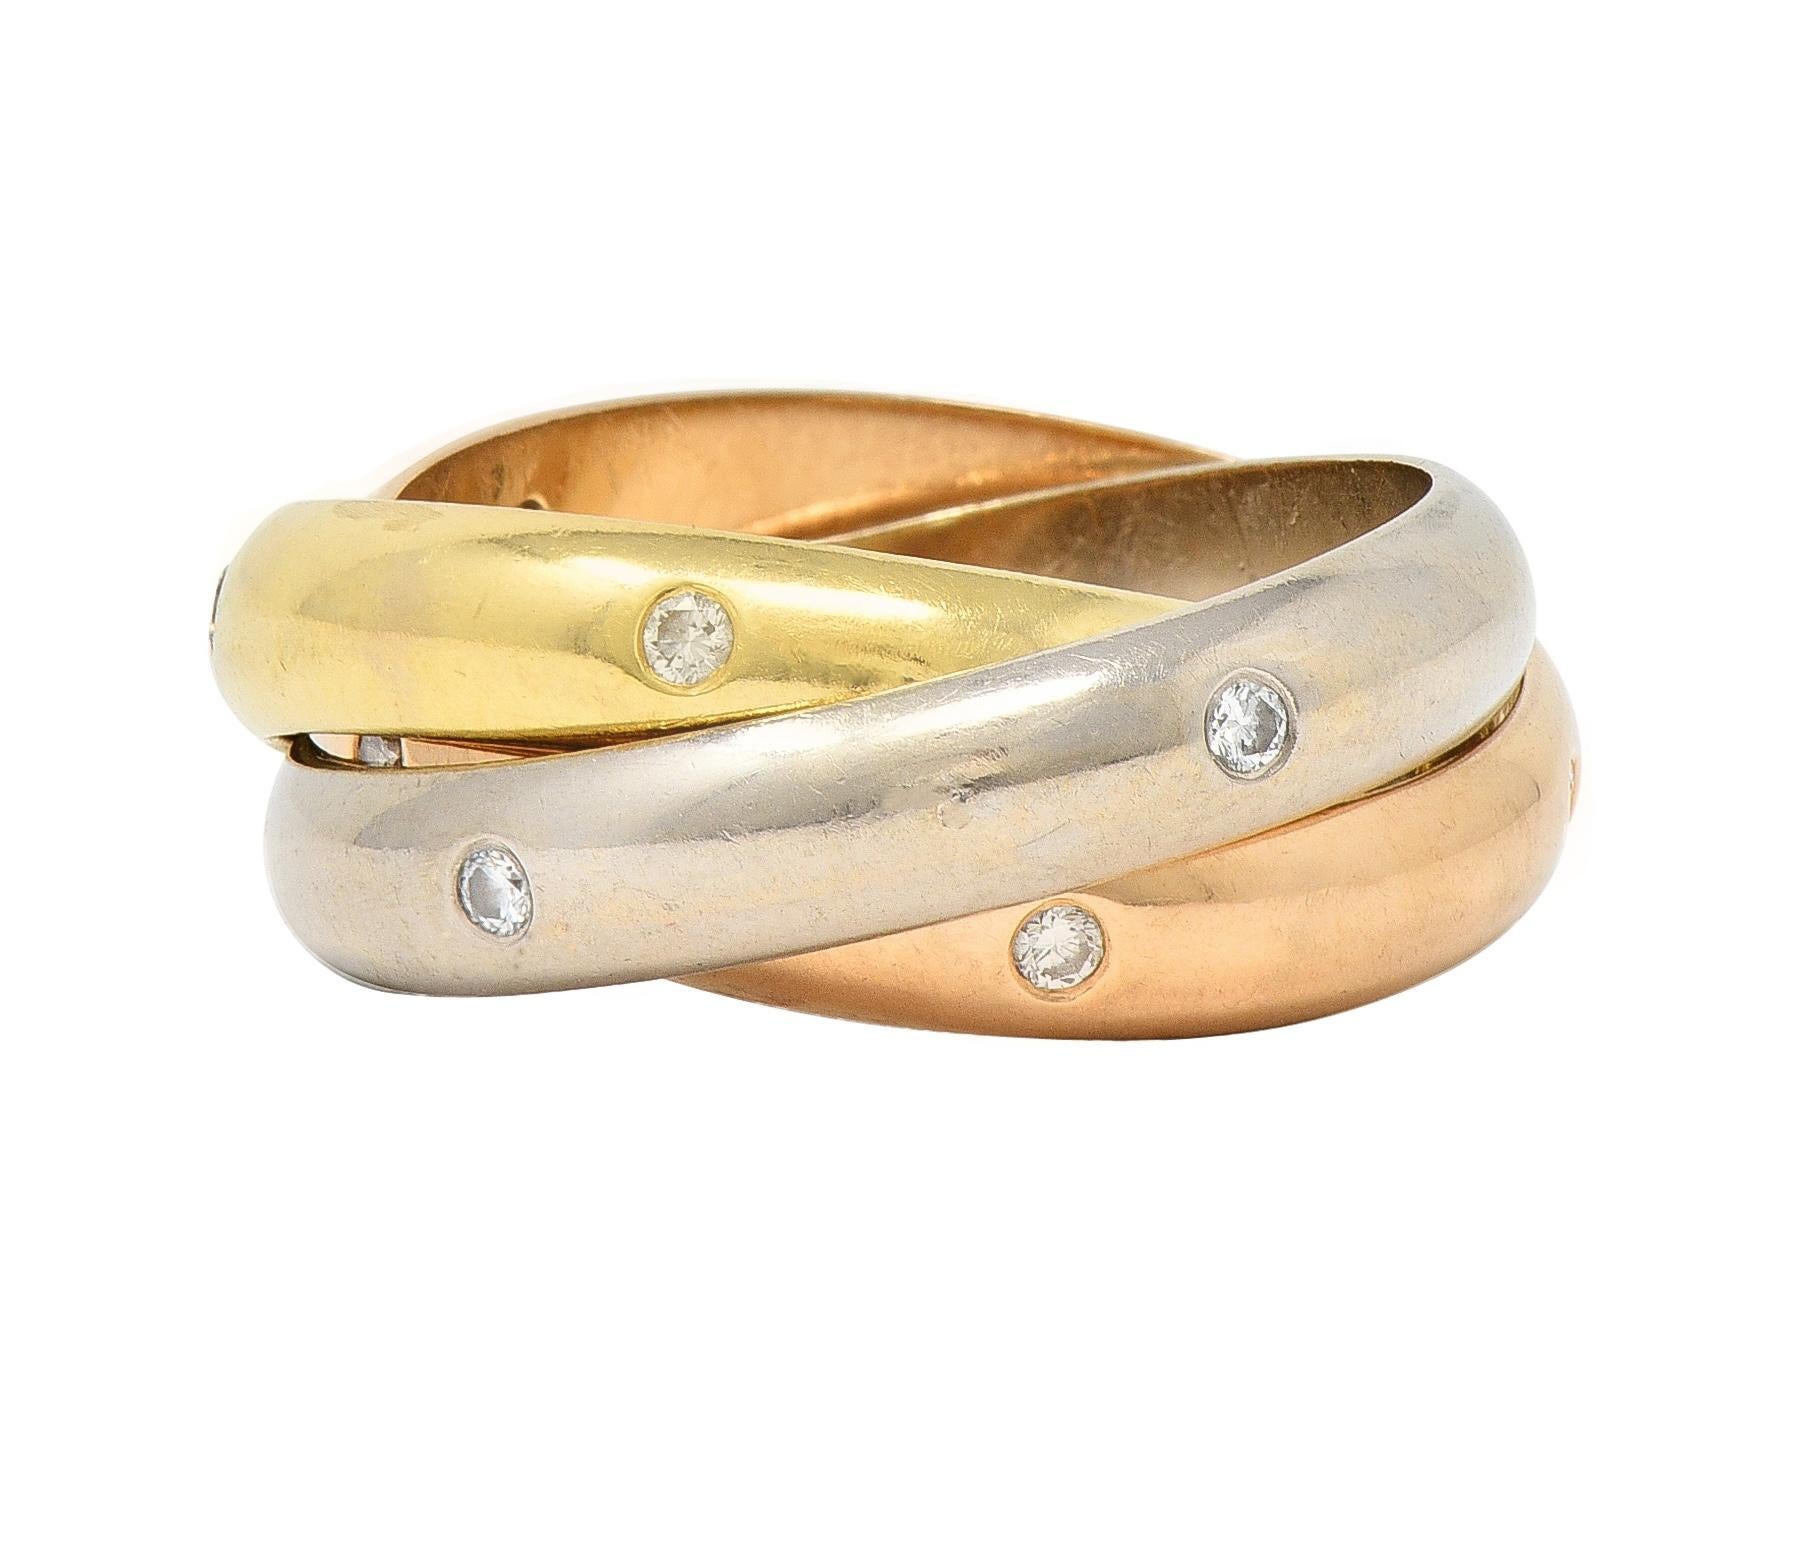 Ring is comprised of three interlocking bands of rose, white, and yellow gold
Flush set with round brilliant cut diamonds throughout 
Weighing approximately 0.38 carat total - G color with VS clarity
With high polished finish throughout
Stamped for